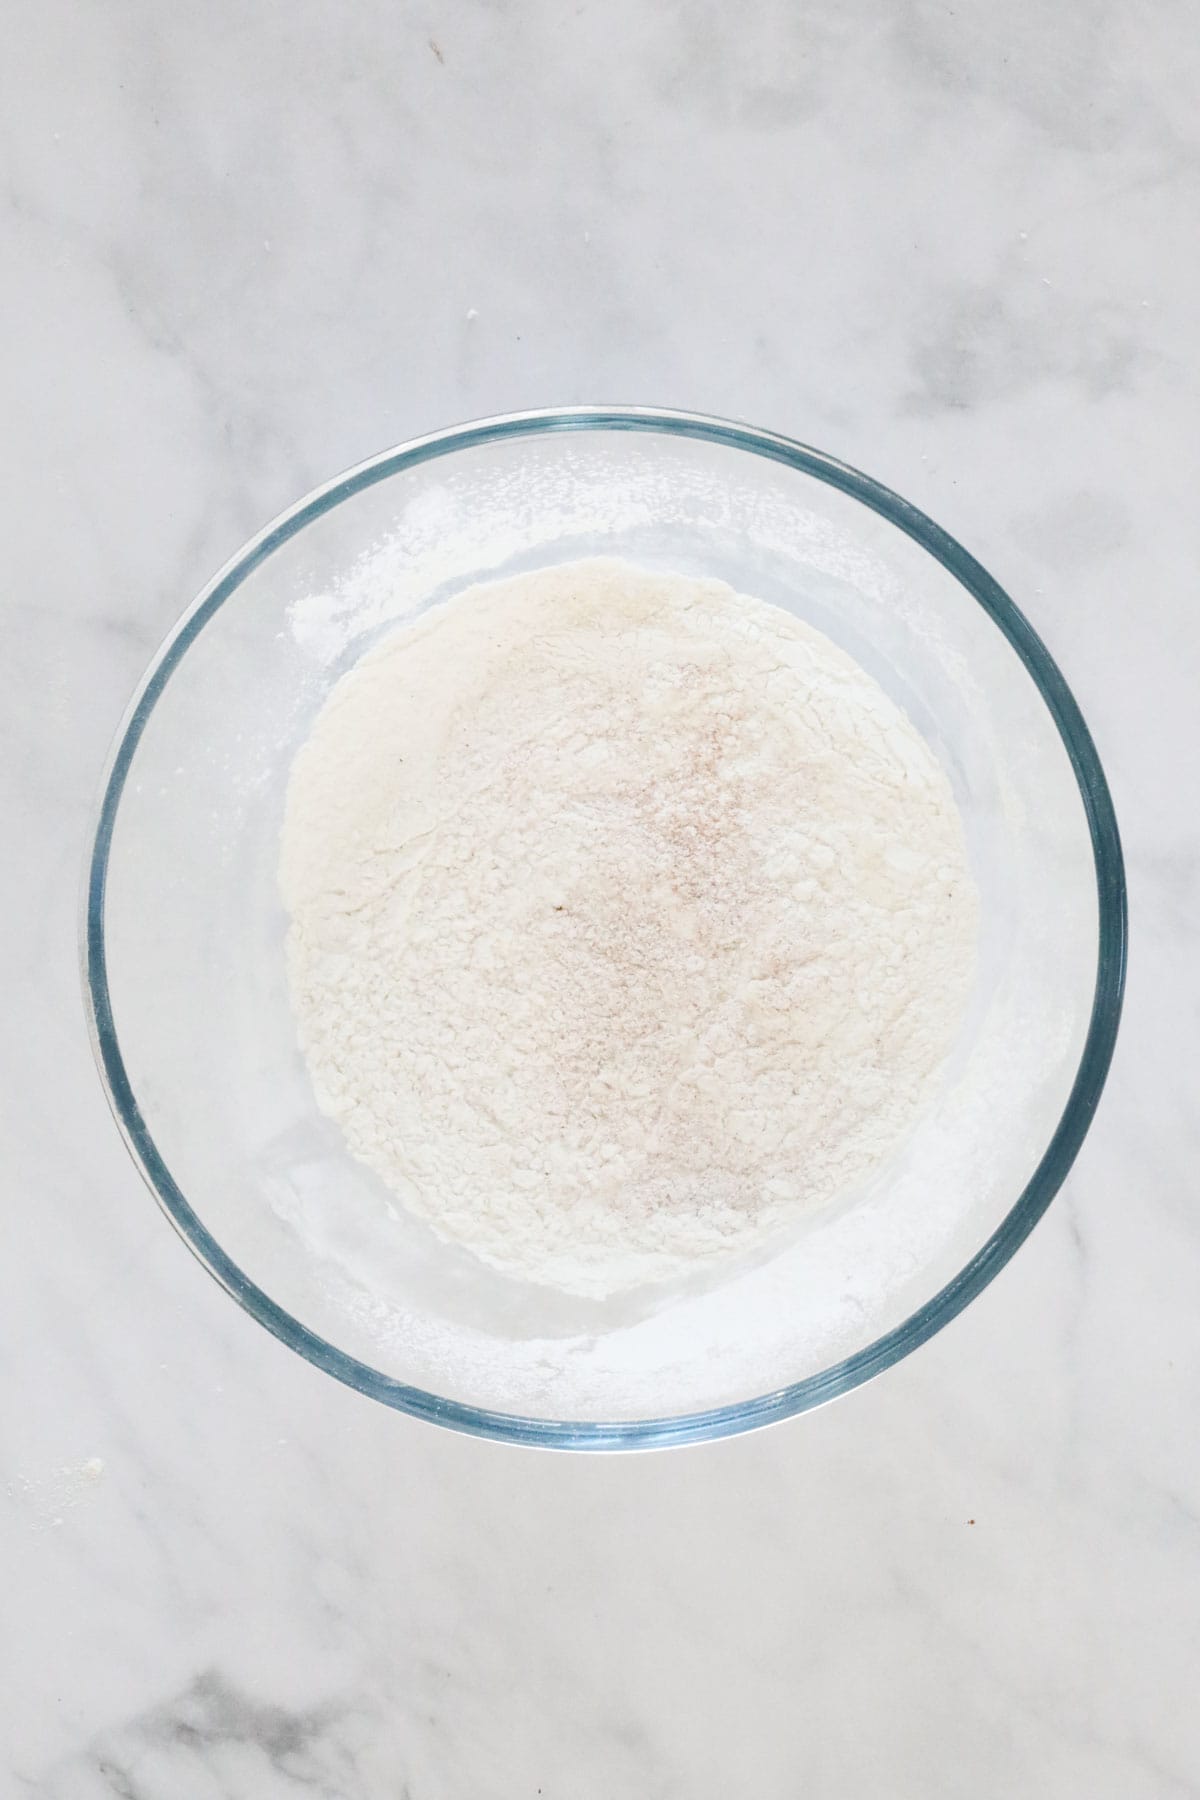 Sifted flour in a clear glass mixing bowl.